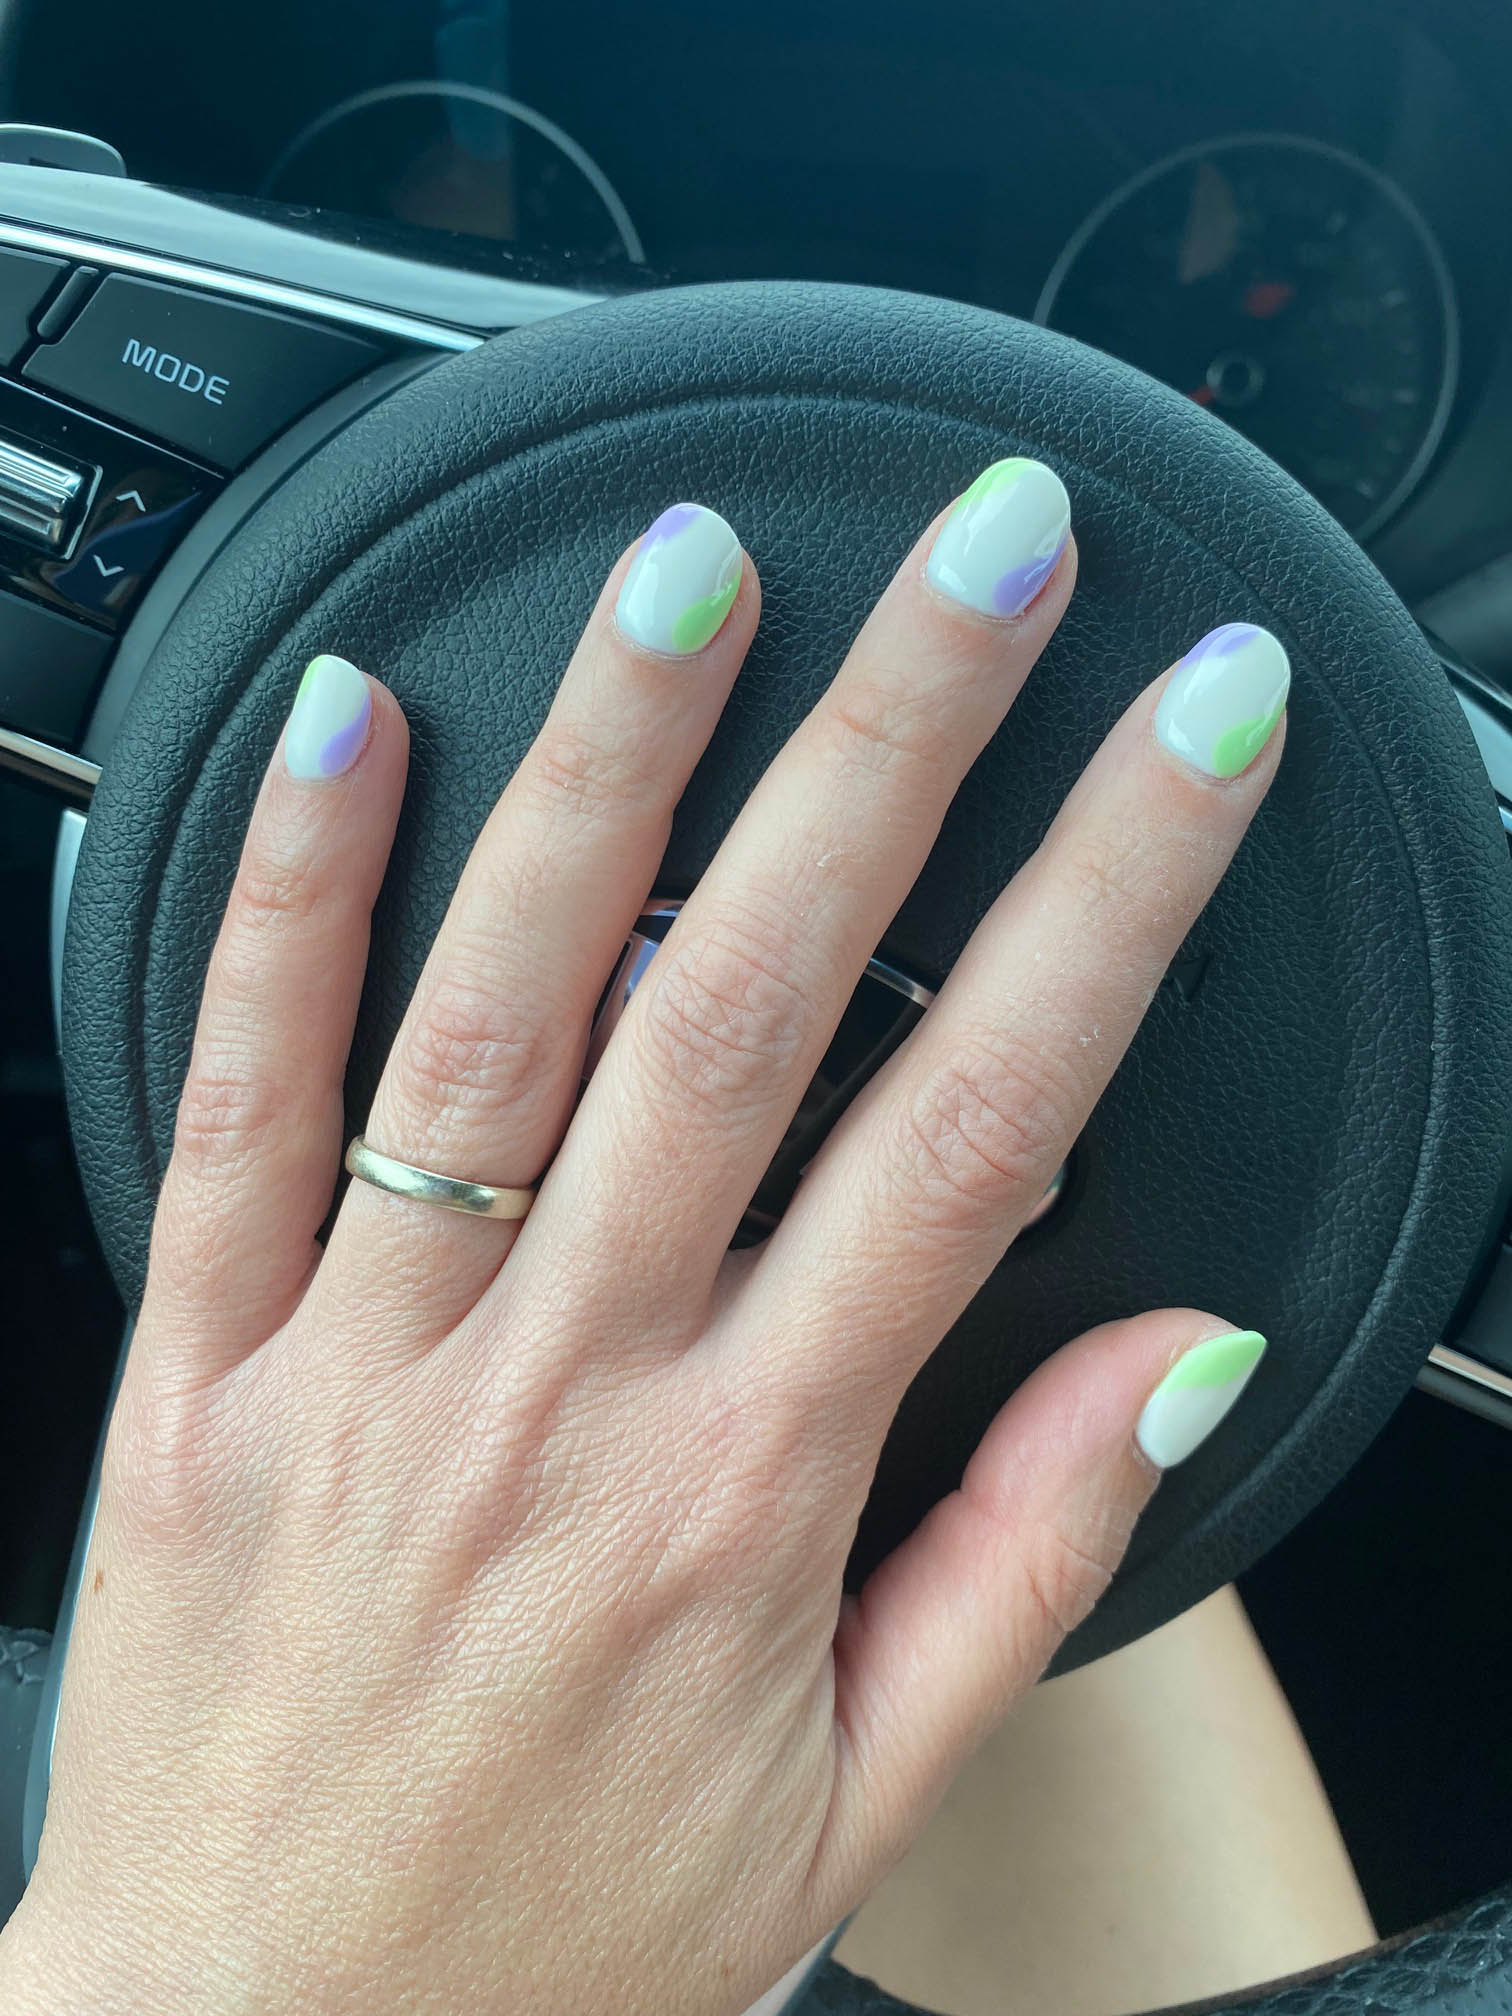 Simple White Nails Design With Light Purple Green Color Block DIY Manicure